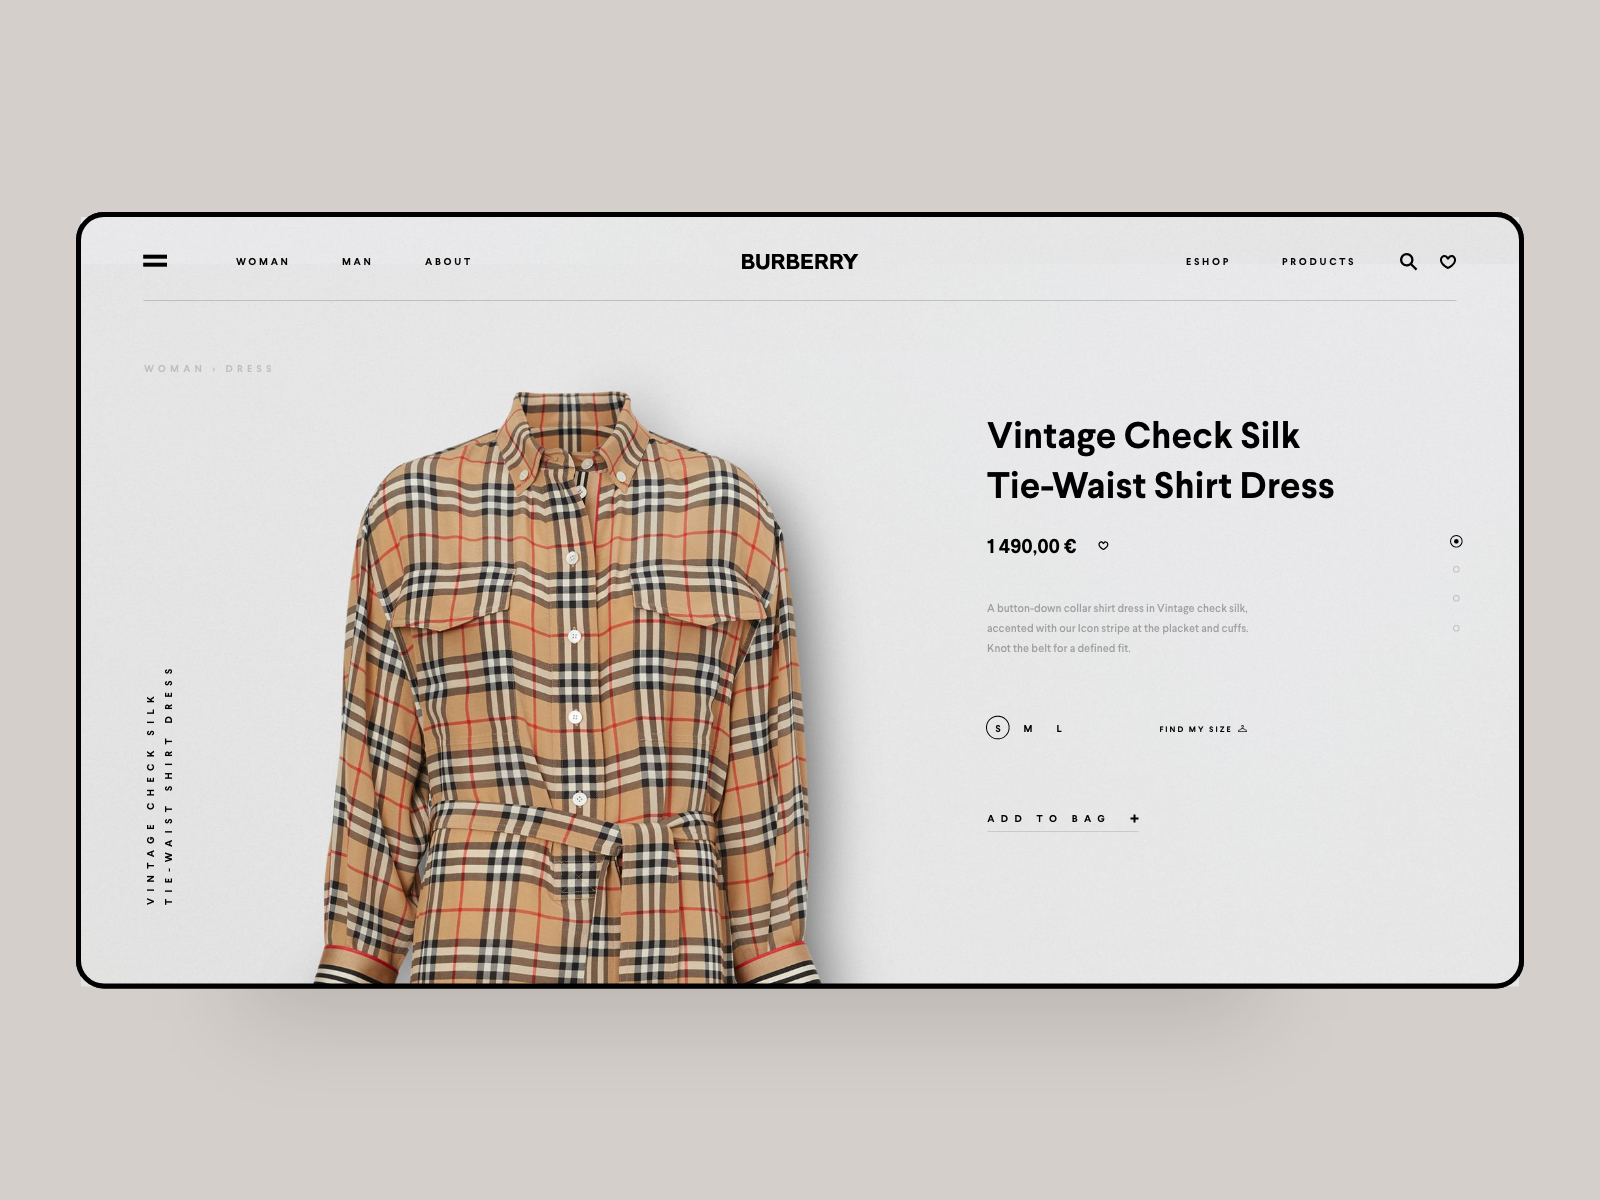 Parity Shop >>> burberry web 3.0 with a Reserve price, Up 